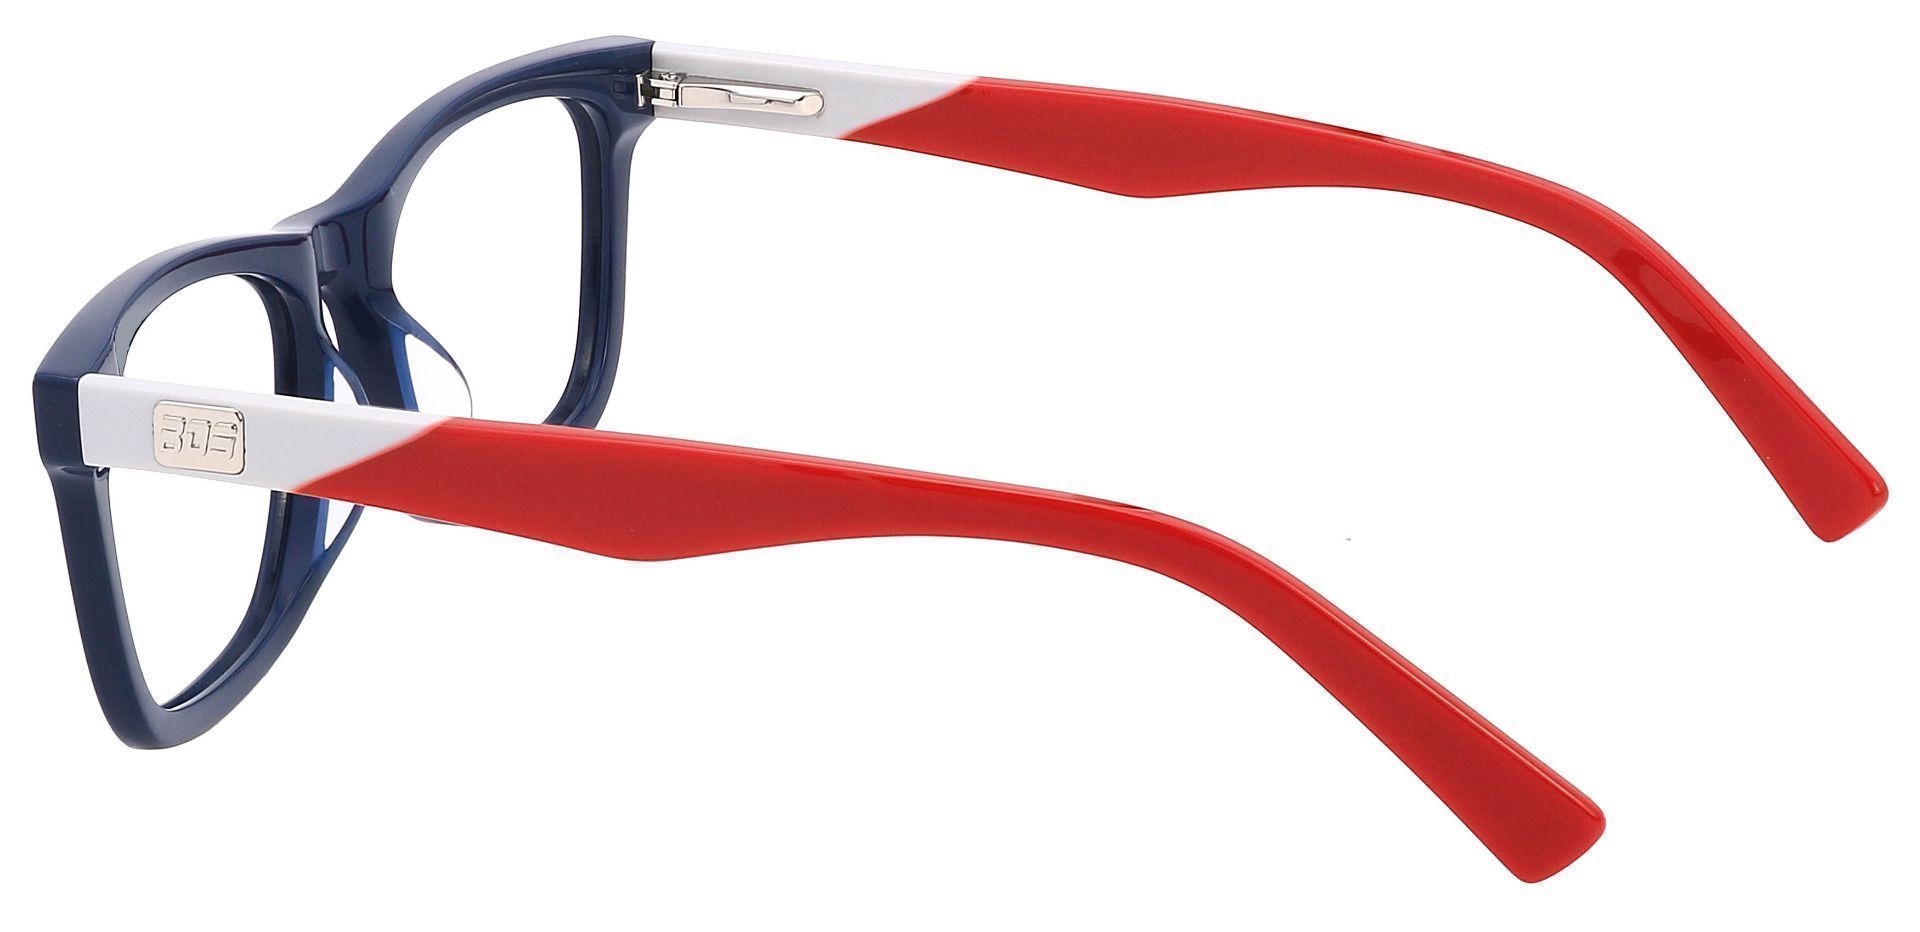 Newbury Rectangle Blue Light Blocking Glasses - The Frame Is Blue And Red